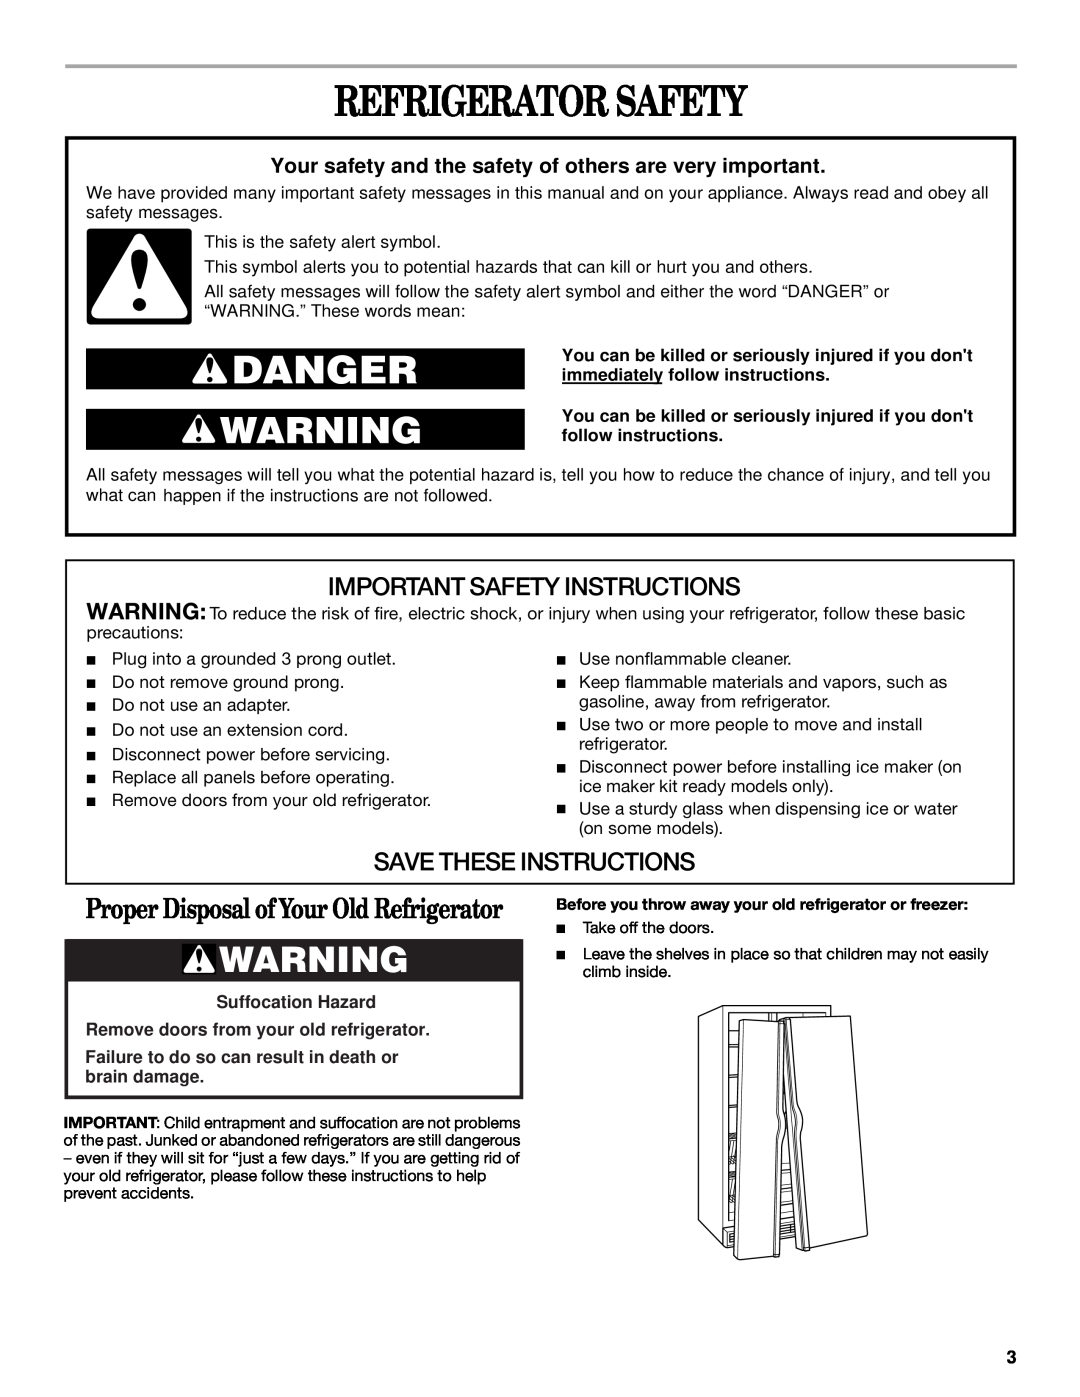 Whirlpool GC5SHGXKB00 manual Refrigerator Safety, Proper Disposal of Your Old Refrigerator, Important Safety Instructions 